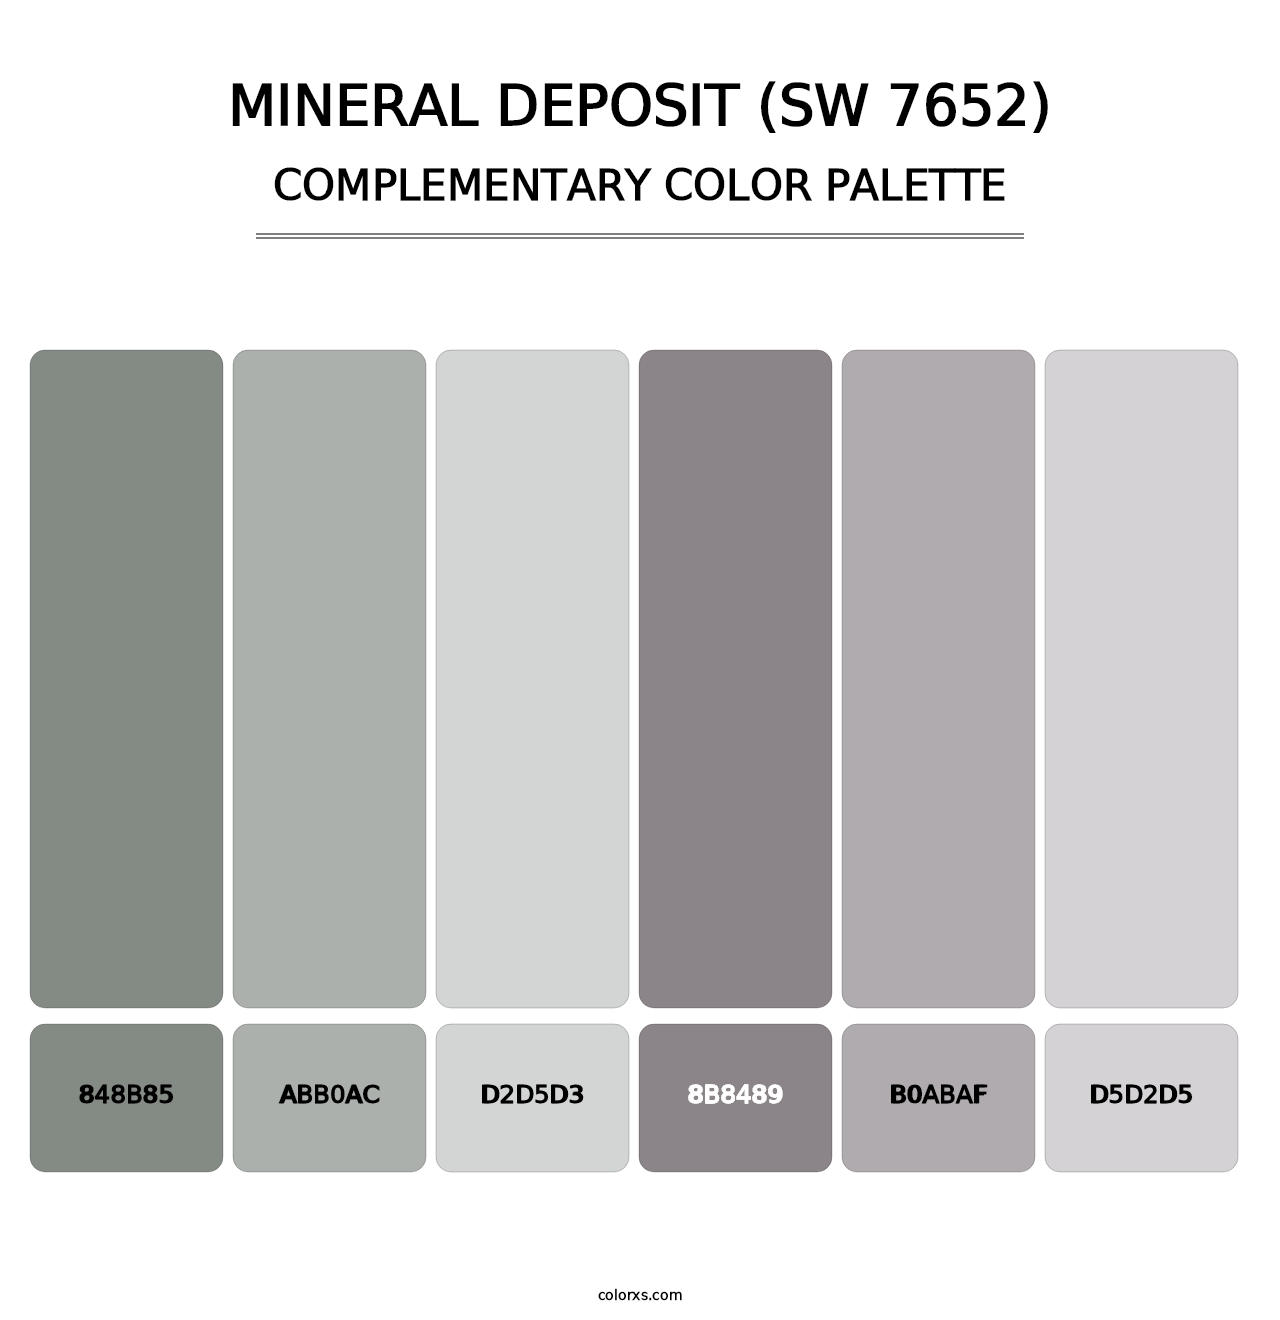 Mineral Deposit (SW 7652) - Complementary Color Palette